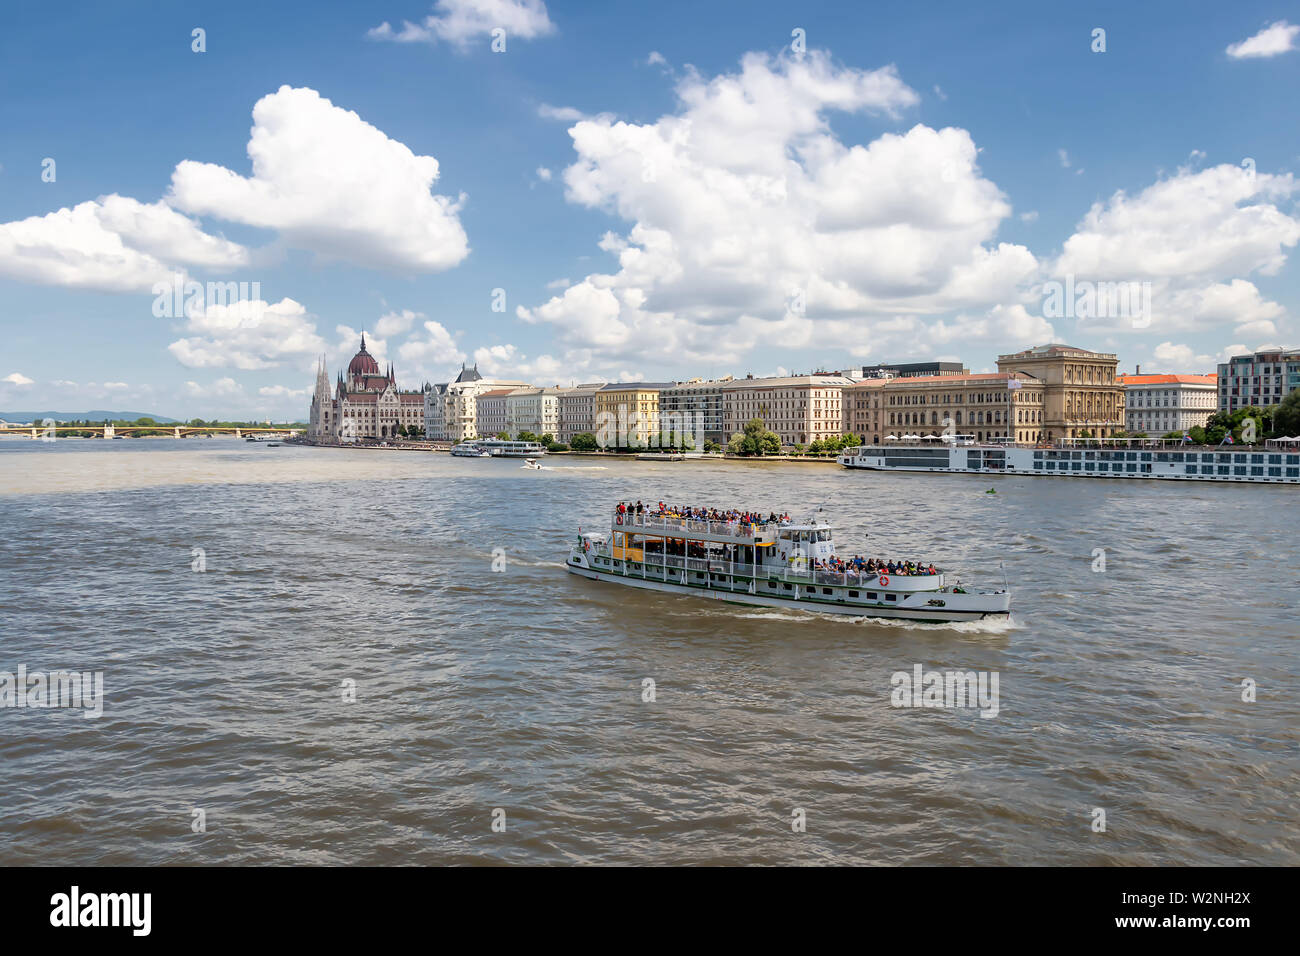 Sightseeing tourist cruise boat on the River Danube in Budapest city centre Stock Photo